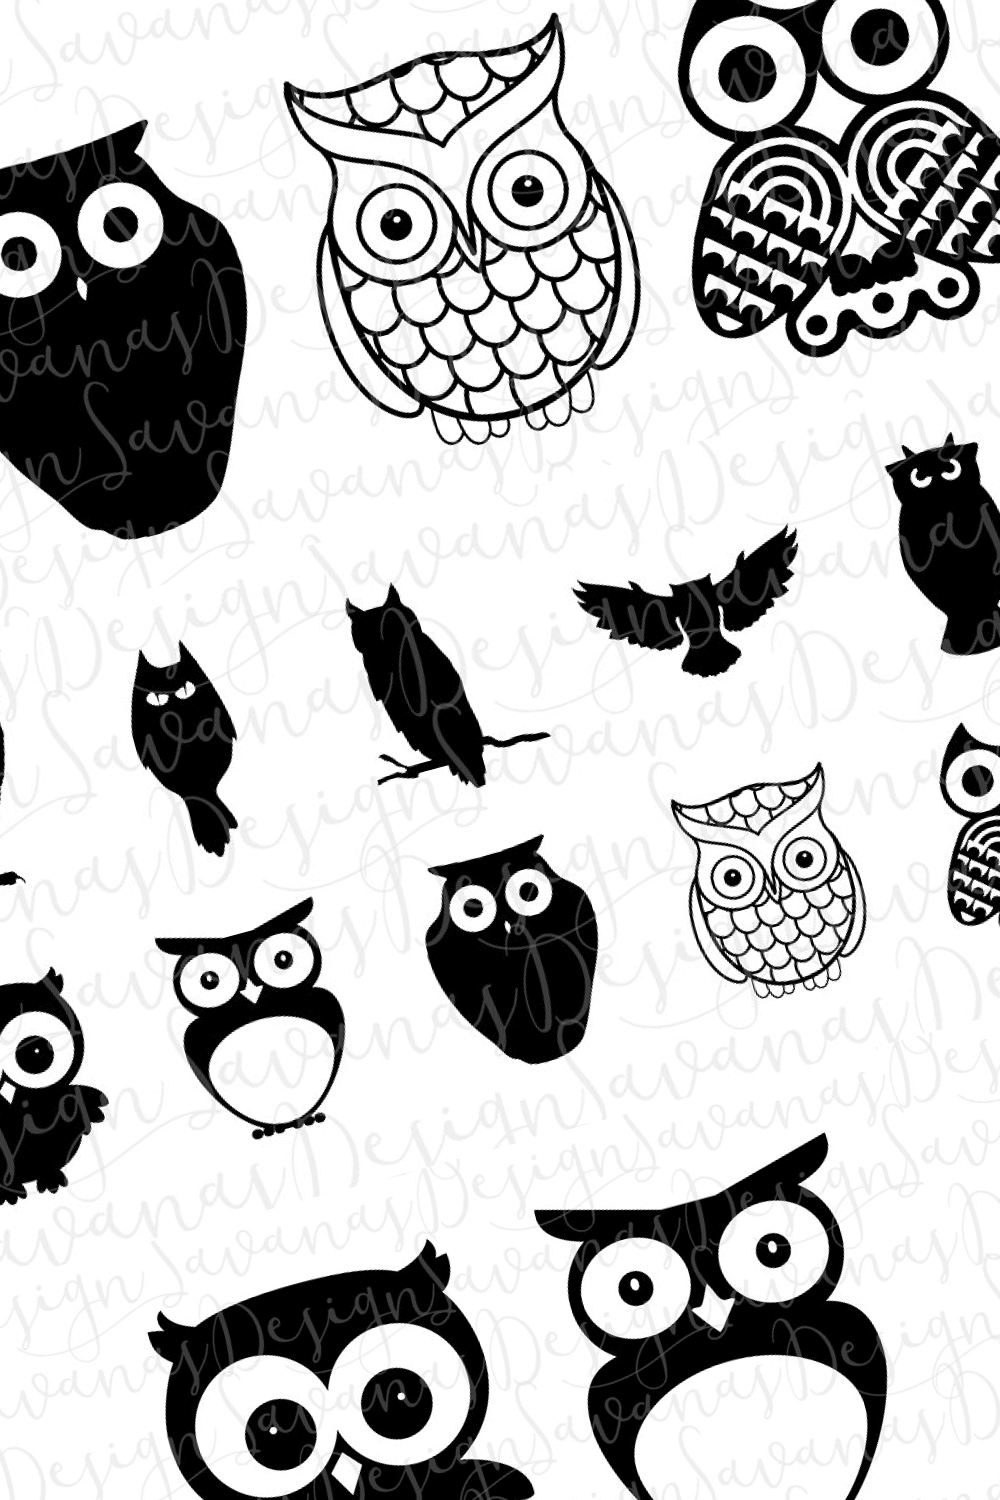 Diagonal Picture of Owl Silhouettes.